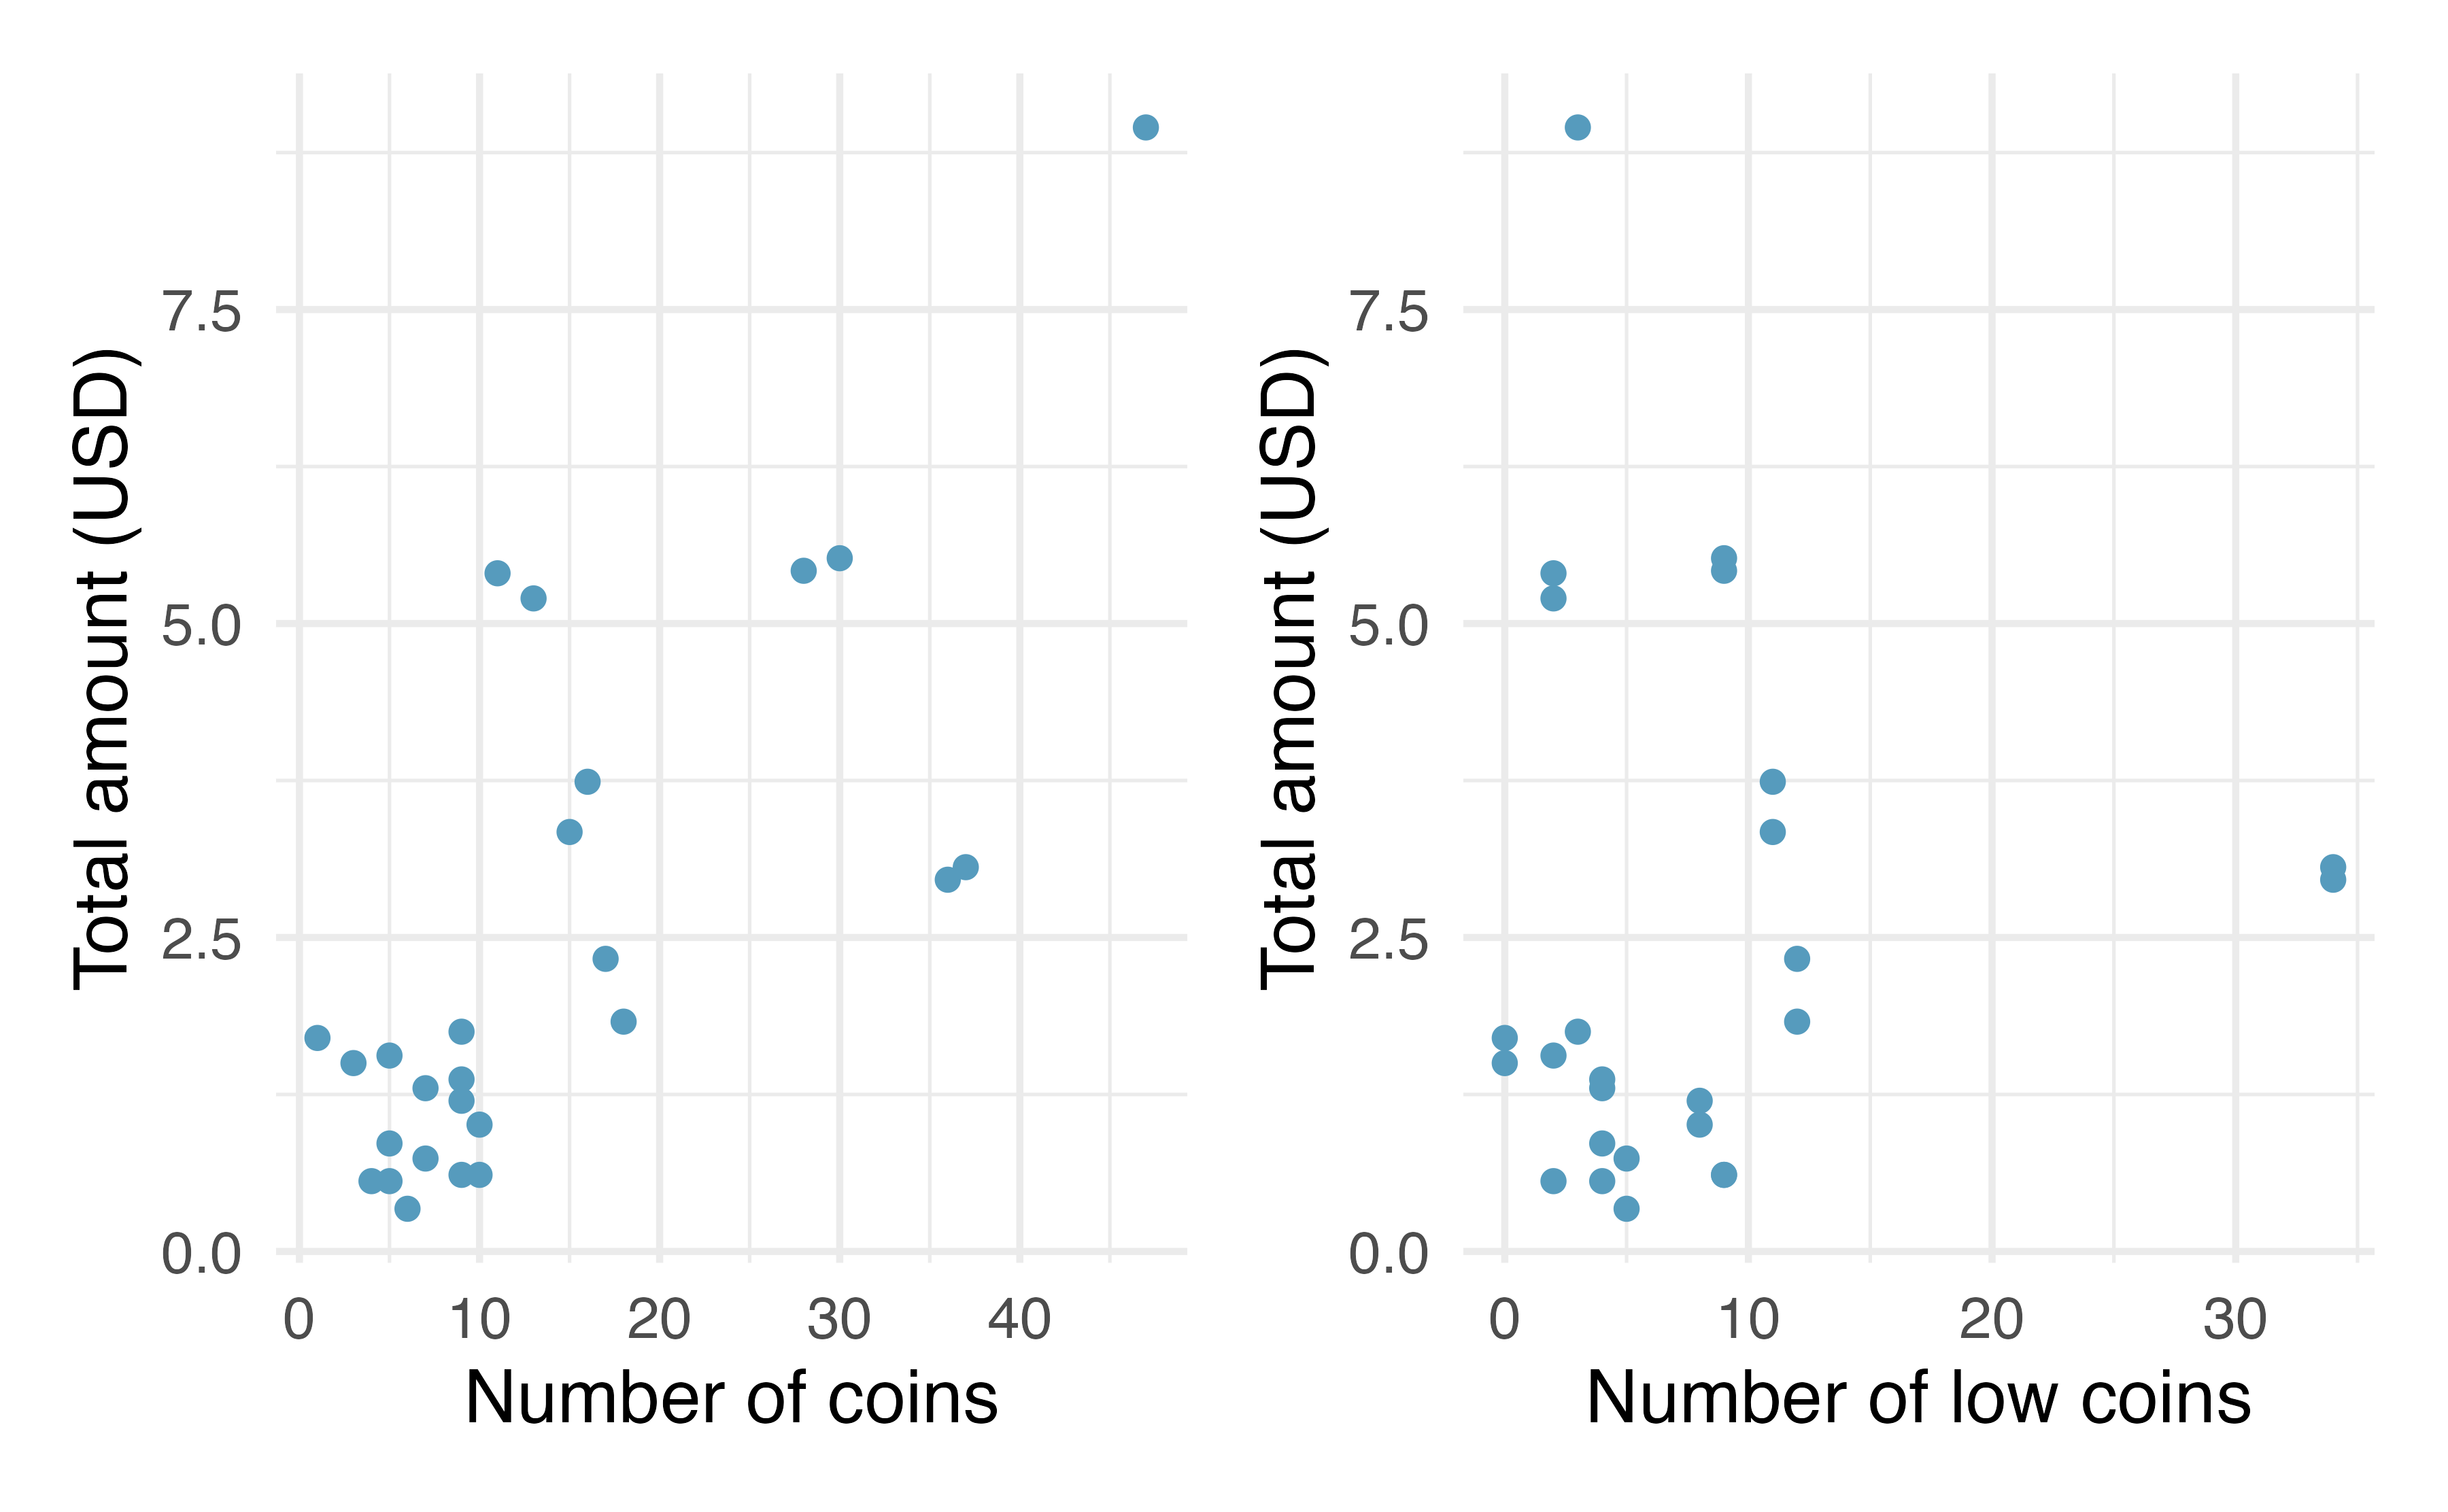 Plot describing the total amount of money (USD) as a function of the number of coins and the number of low coins. As you might expect, the total amount of money is more highly postively correlated with the total number of coins than with the number of low coins.